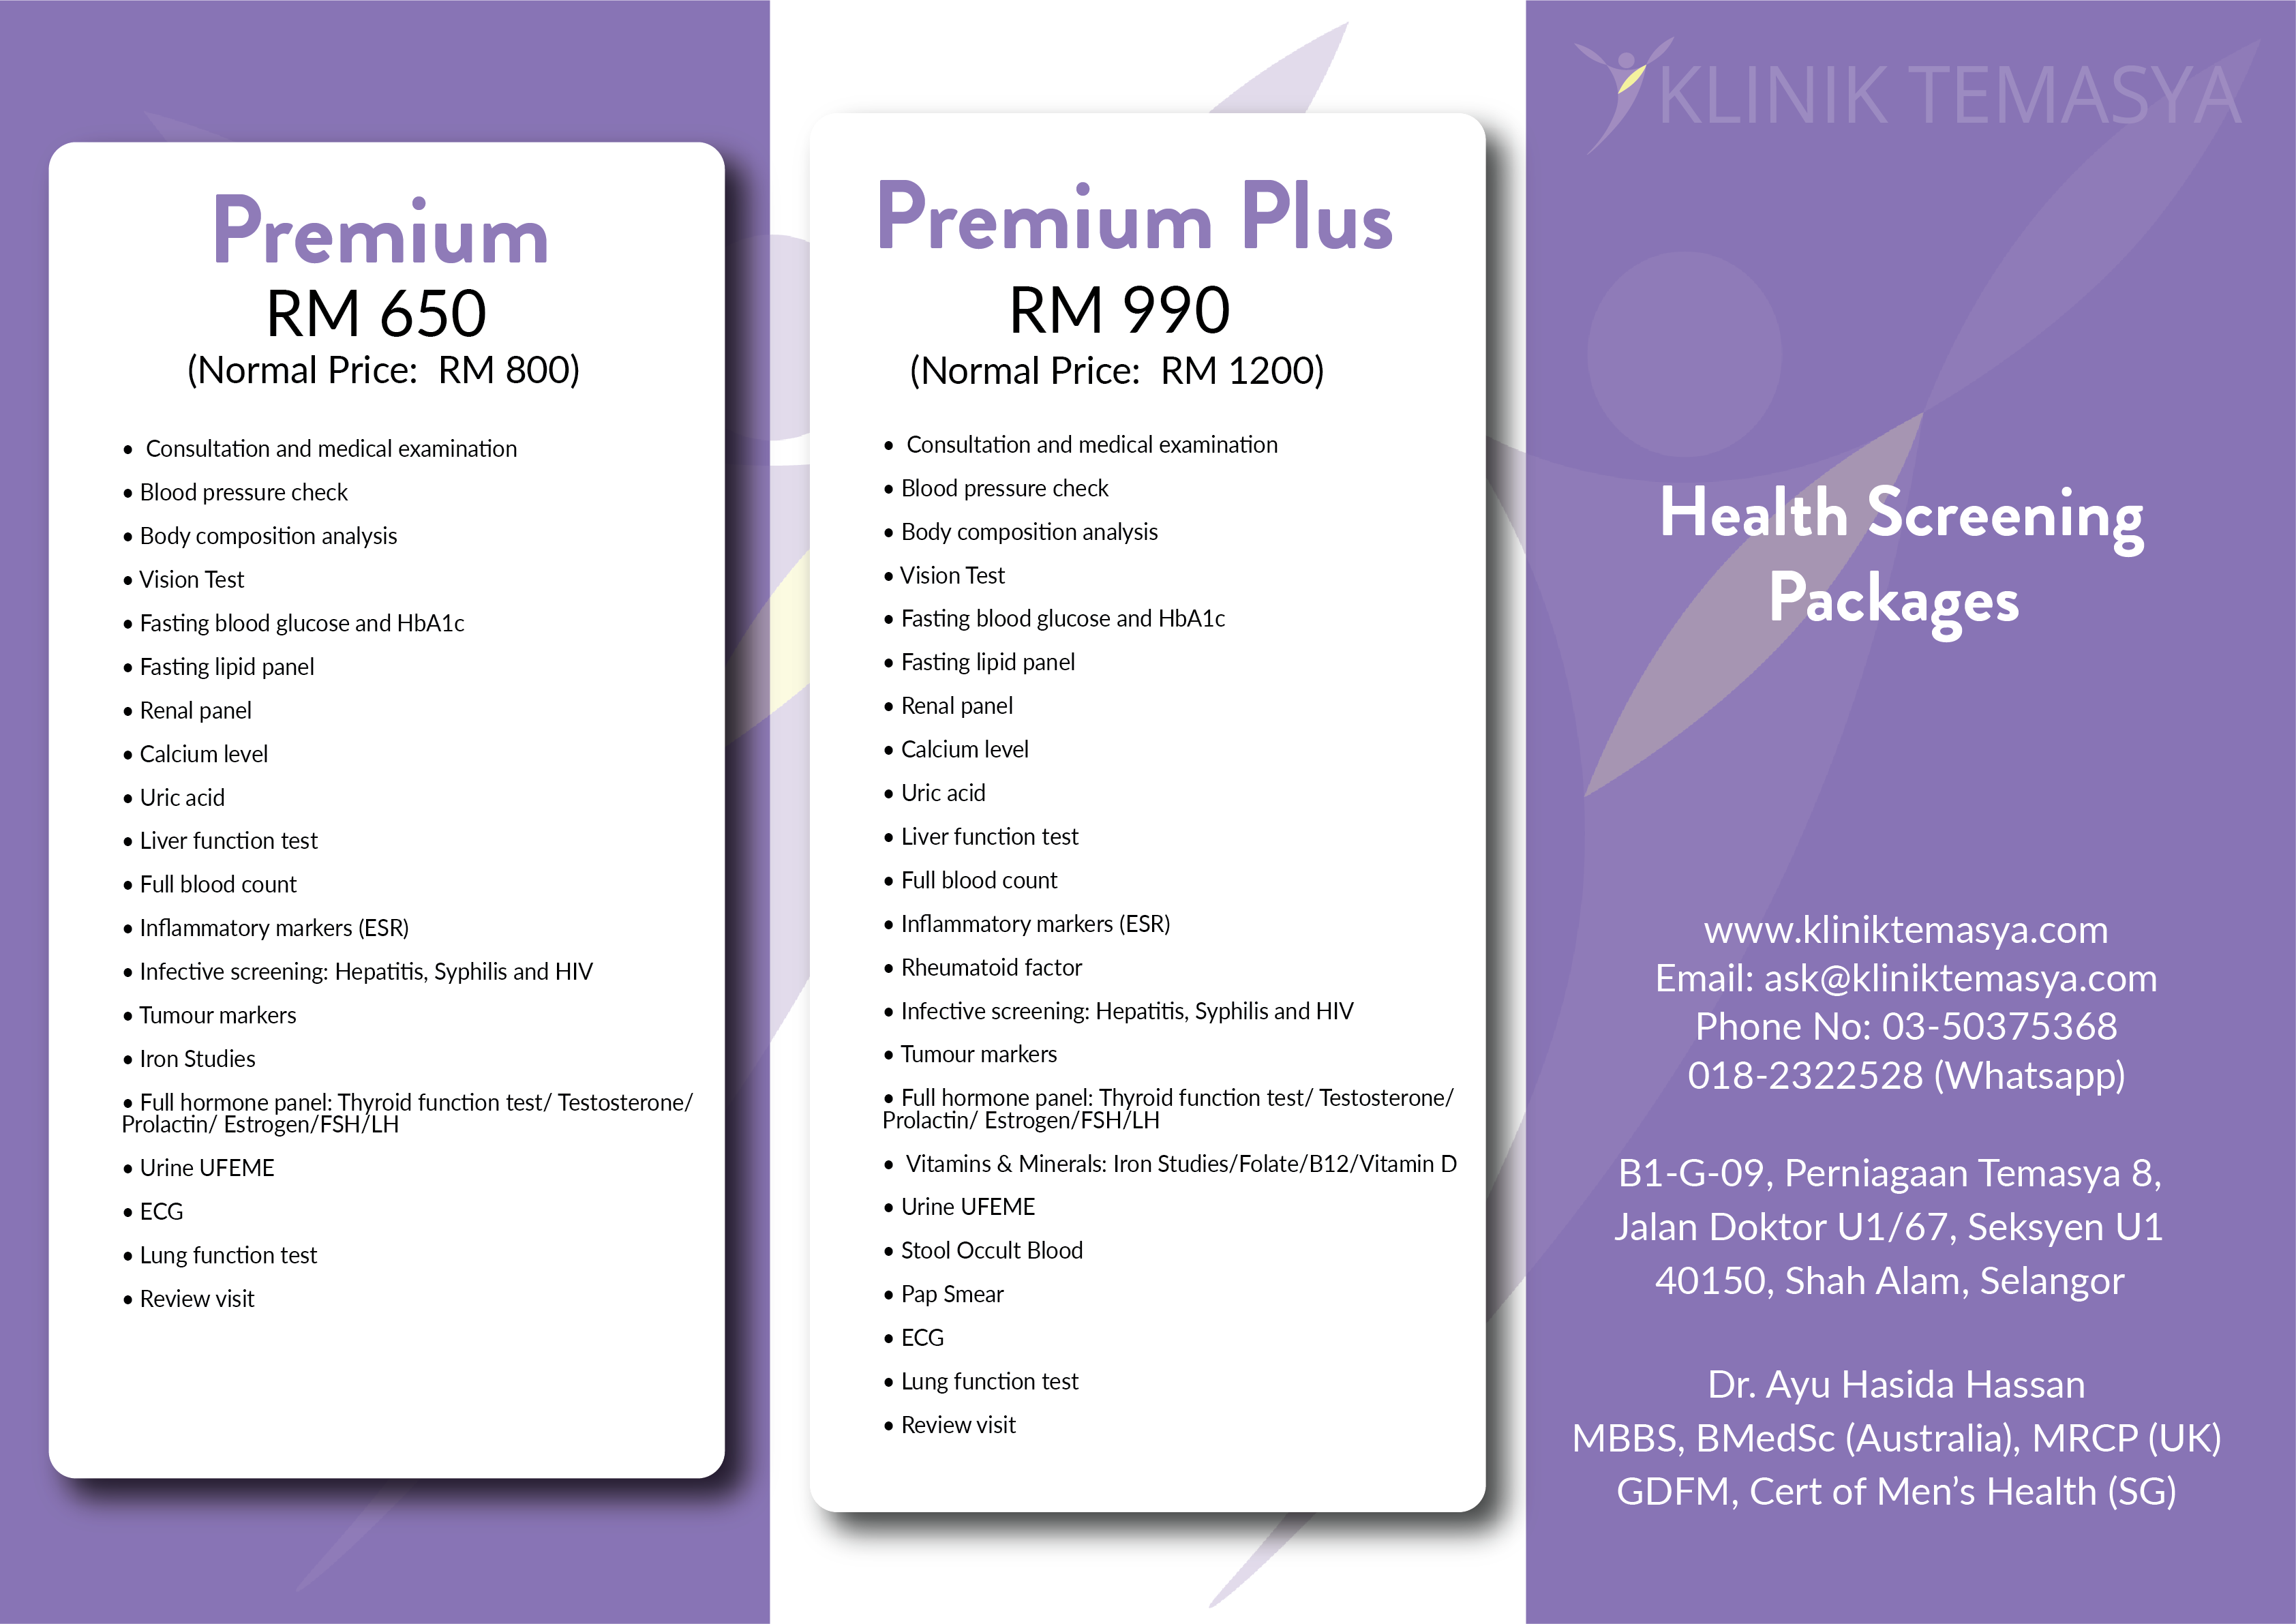 Health screening package promotion malaysia 2021